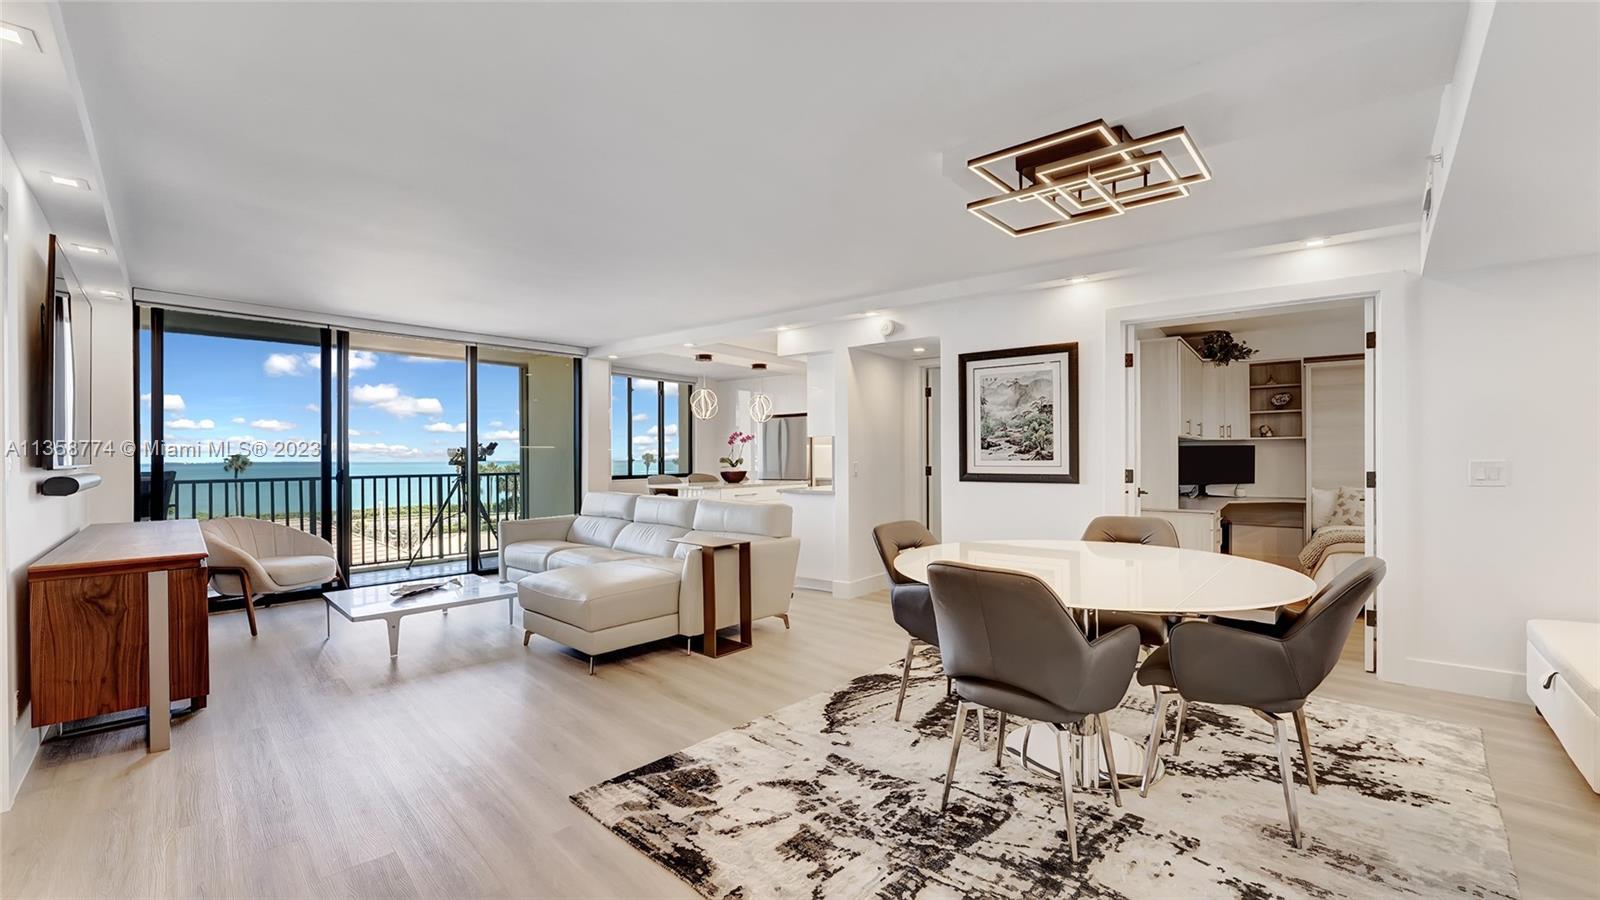 With the views of a cruise ship and amenities of a luxury community, this stunning beach home was fu